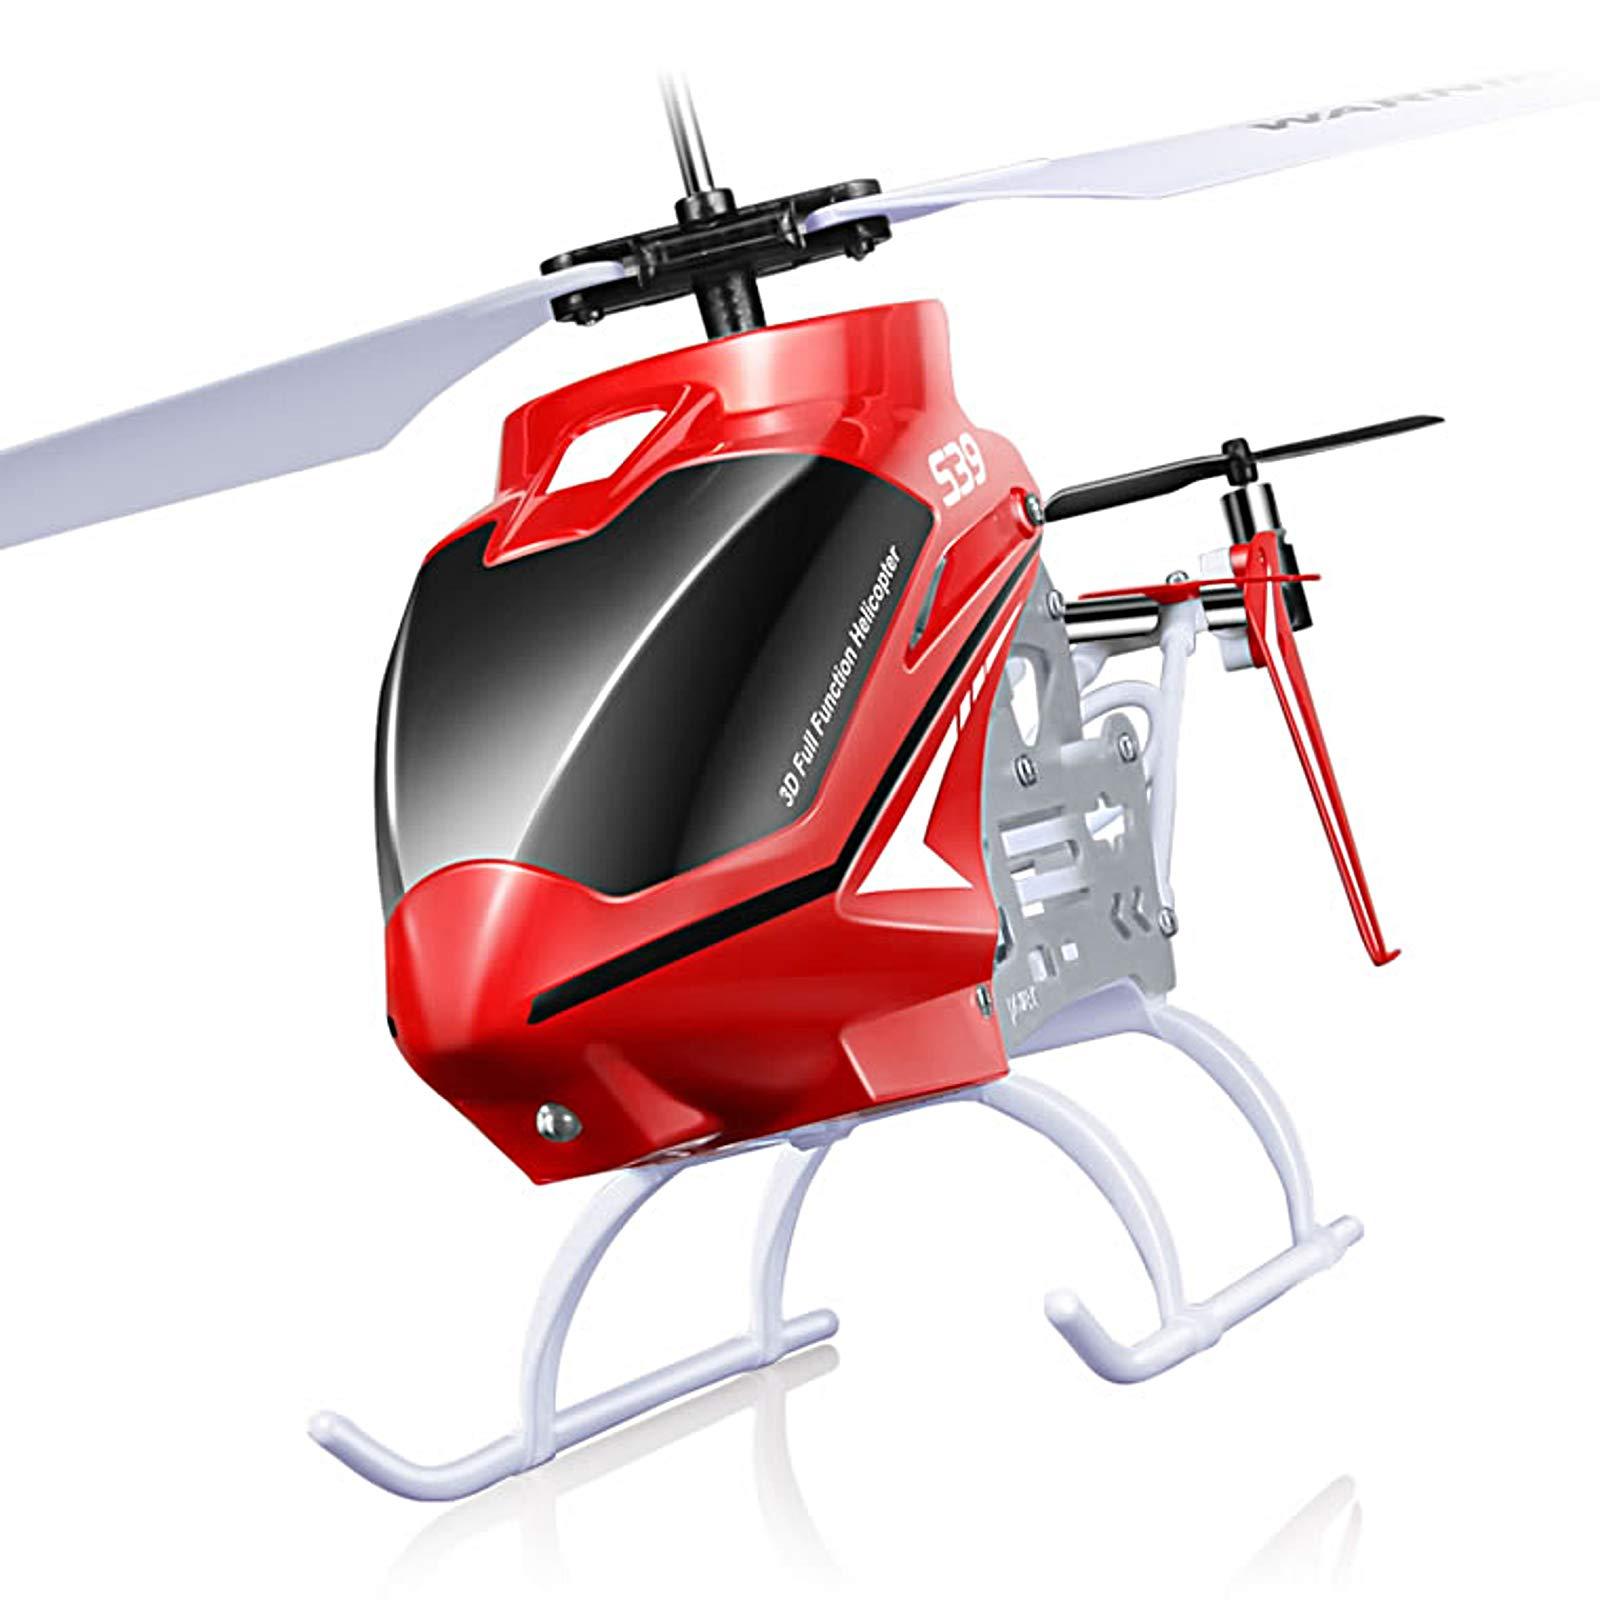 Medium Size Rc Helicopter: Features of Medium-Sized RC Helicopters